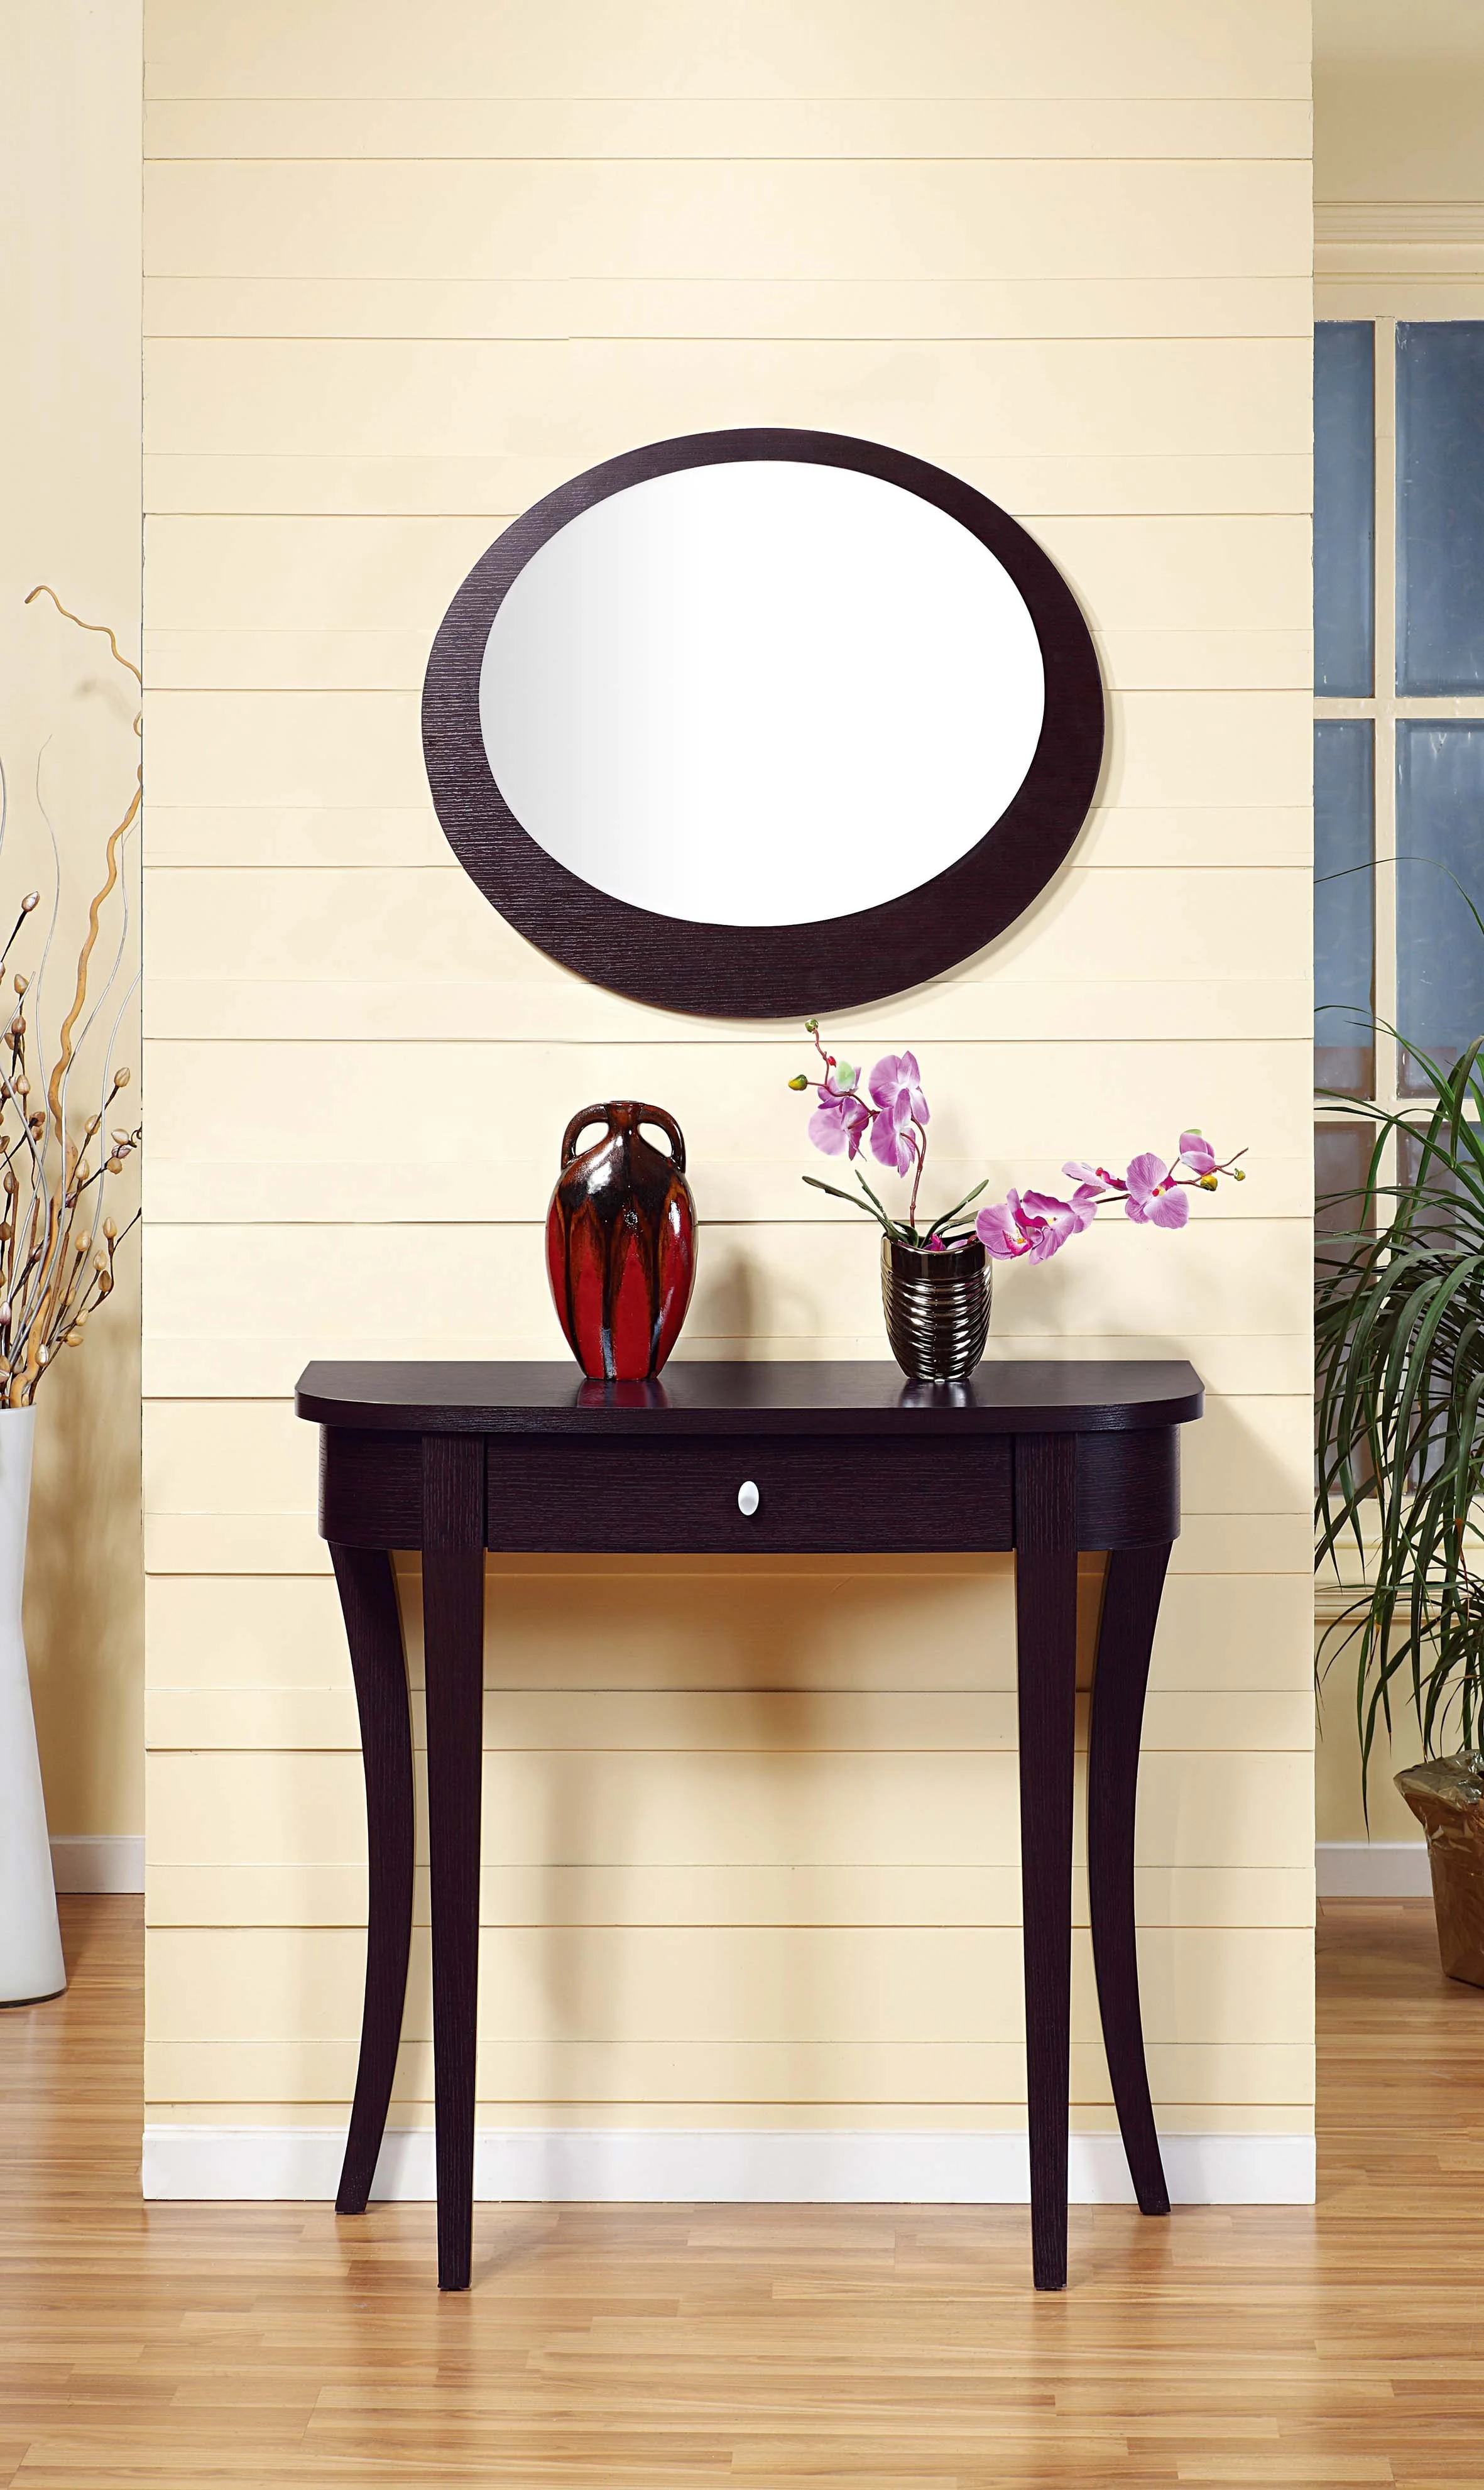 NOVA DMUE029 Nordic Round Wood Base Modern Vase Decoration Side Table With Mirror